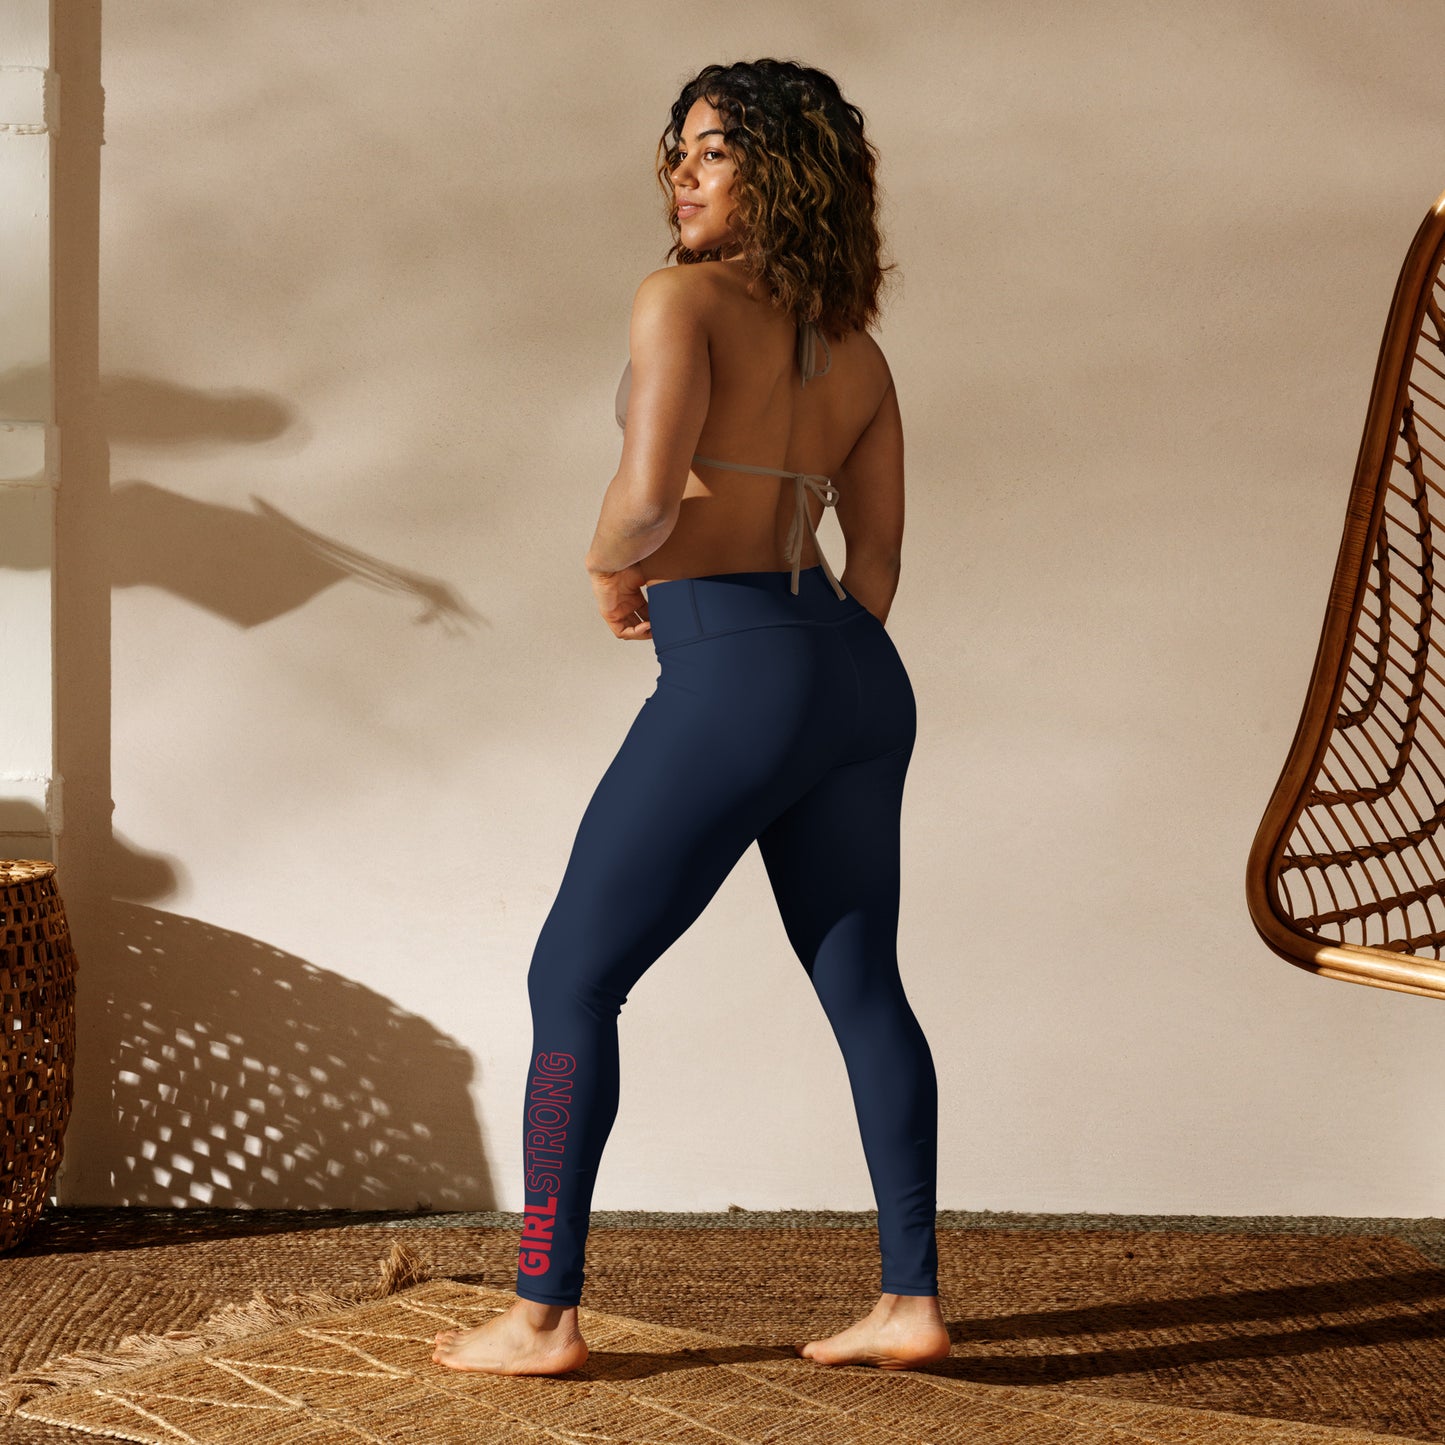 ELEVATED ESSENTIALS, THE PERFECT HIGH WAISTBAND LEGGING MISSISSIPPI